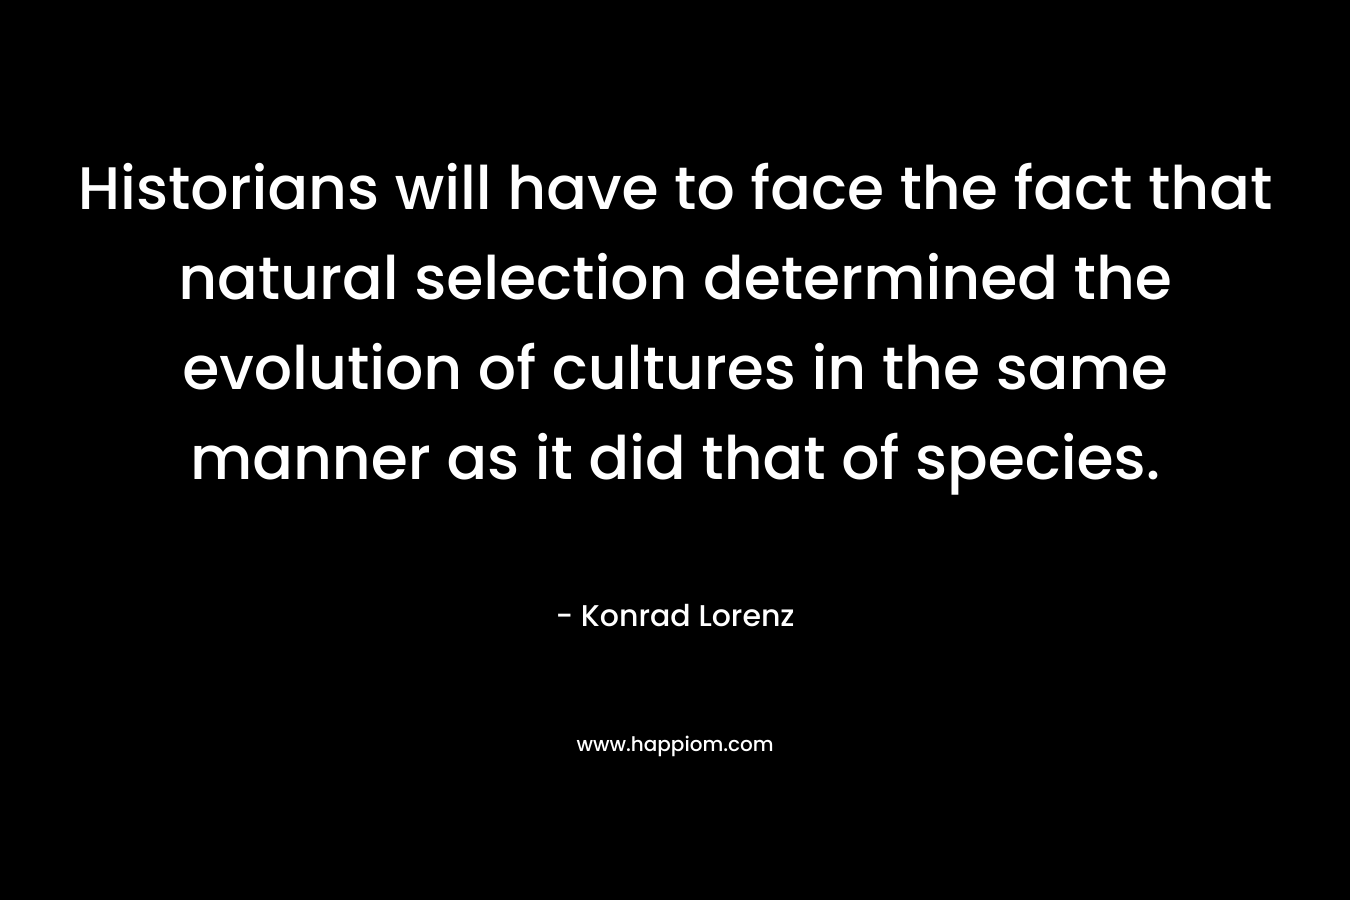 Historians will have to face the fact that natural selection determined the evolution of cultures in the same manner as it did that of species. – Konrad Lorenz